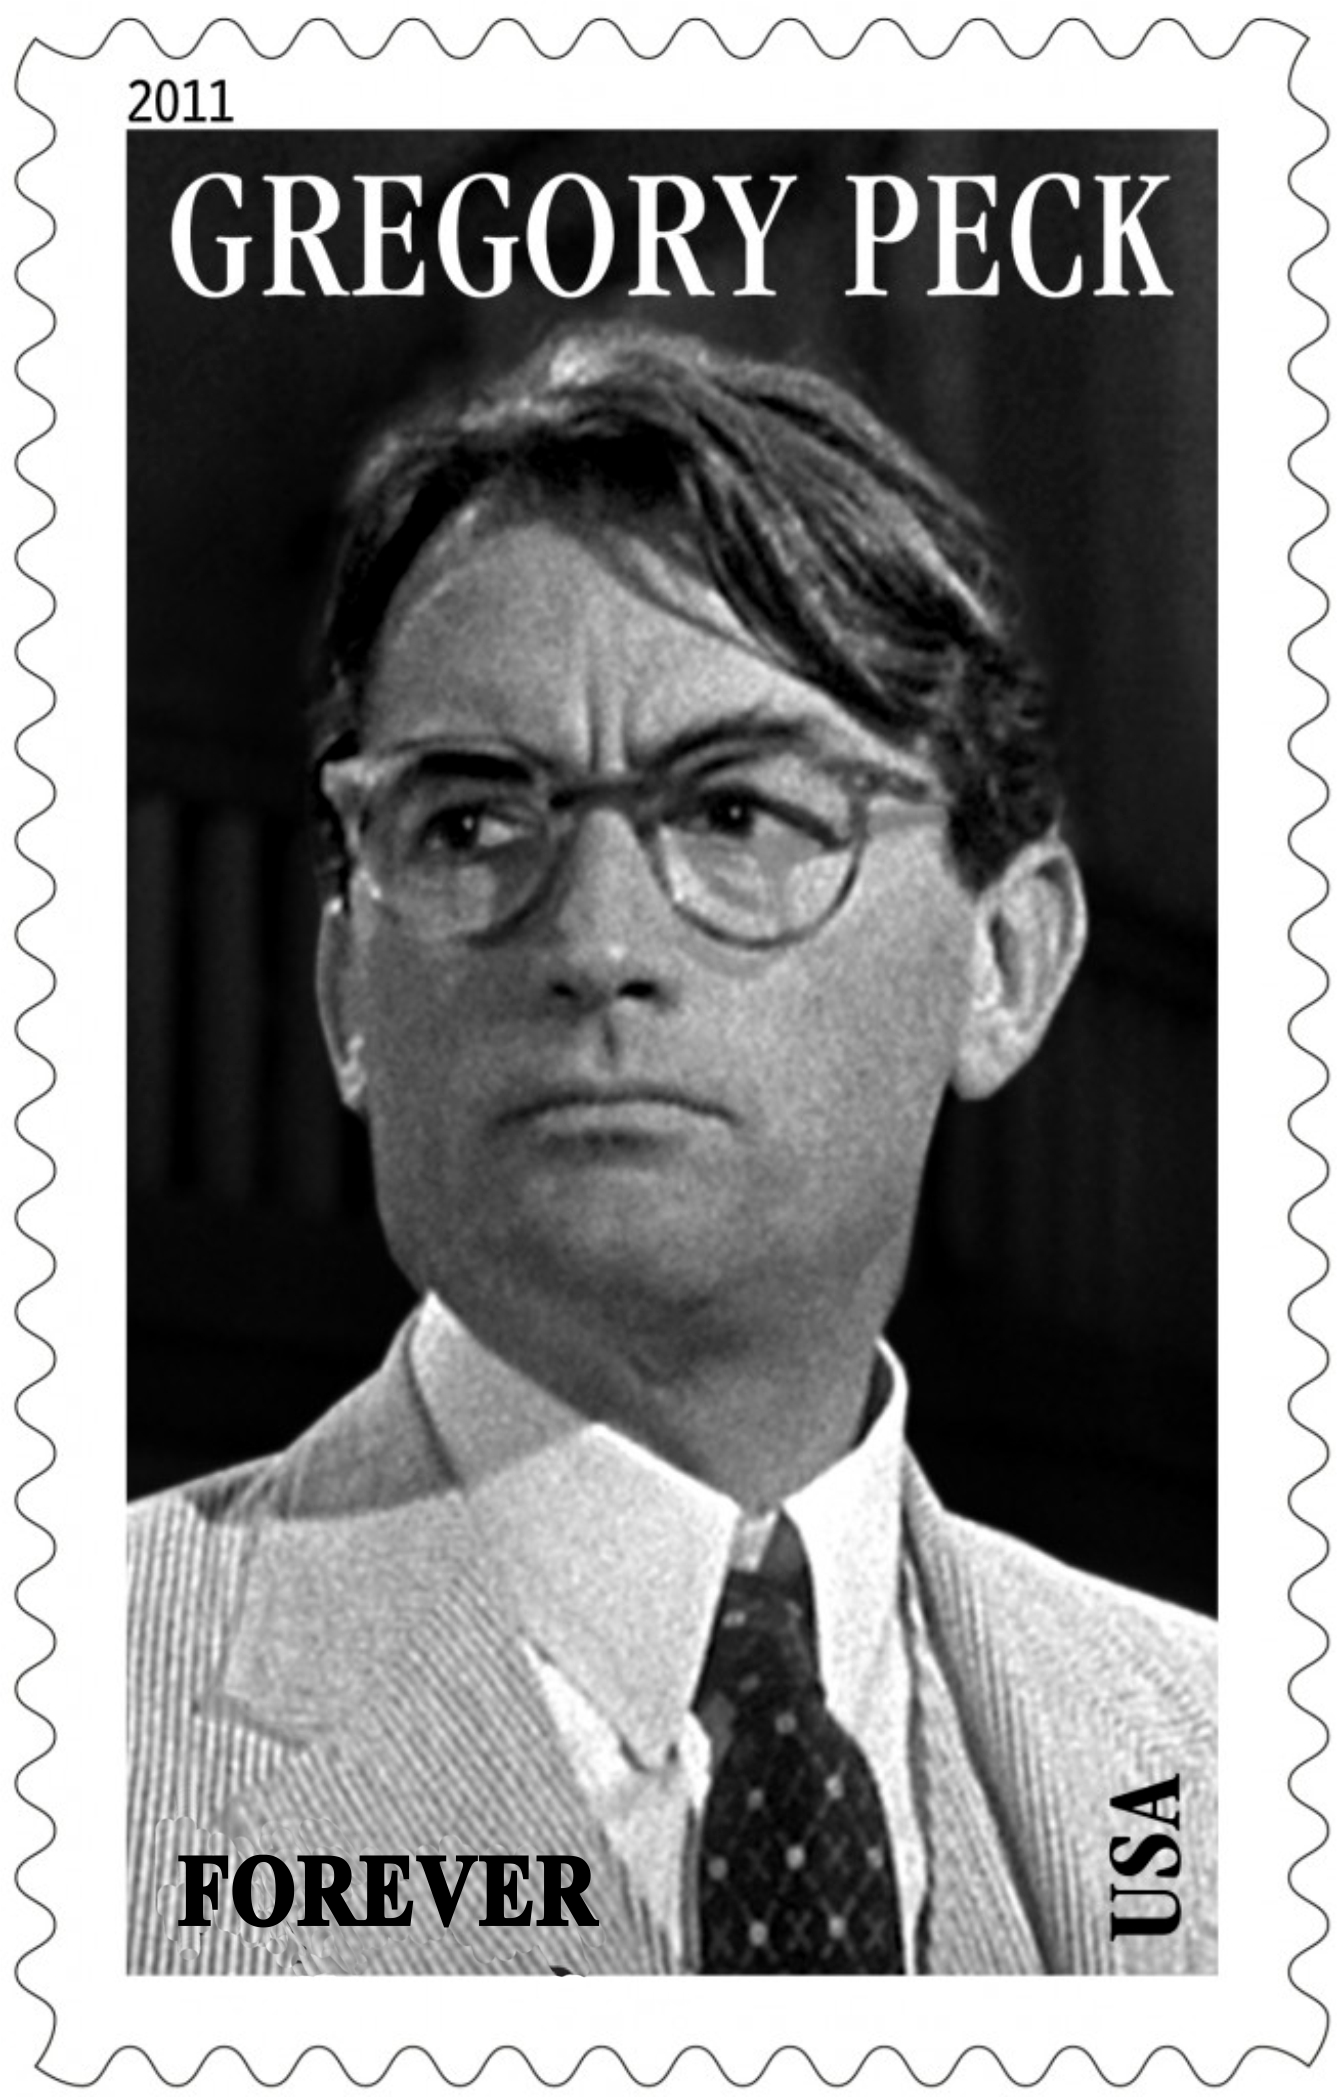 Gregory Peck stamp